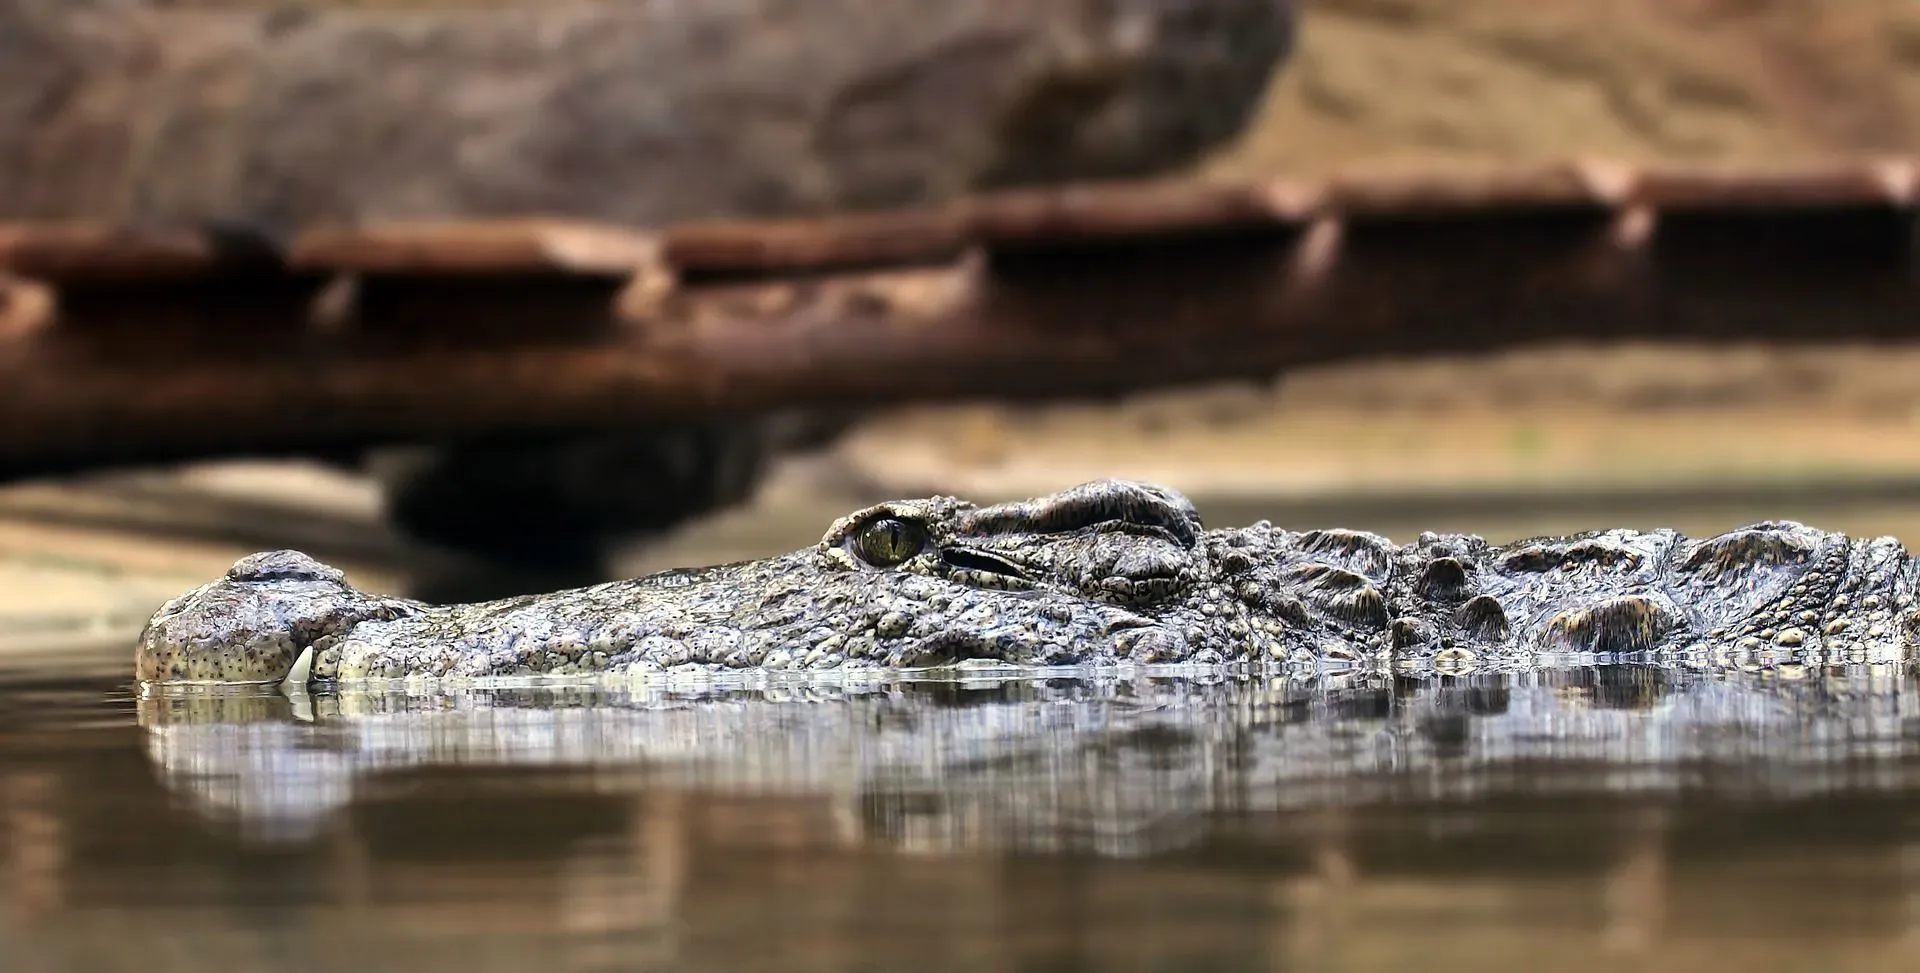 Unlike humans, alligators use their skull bones for the hearing process.